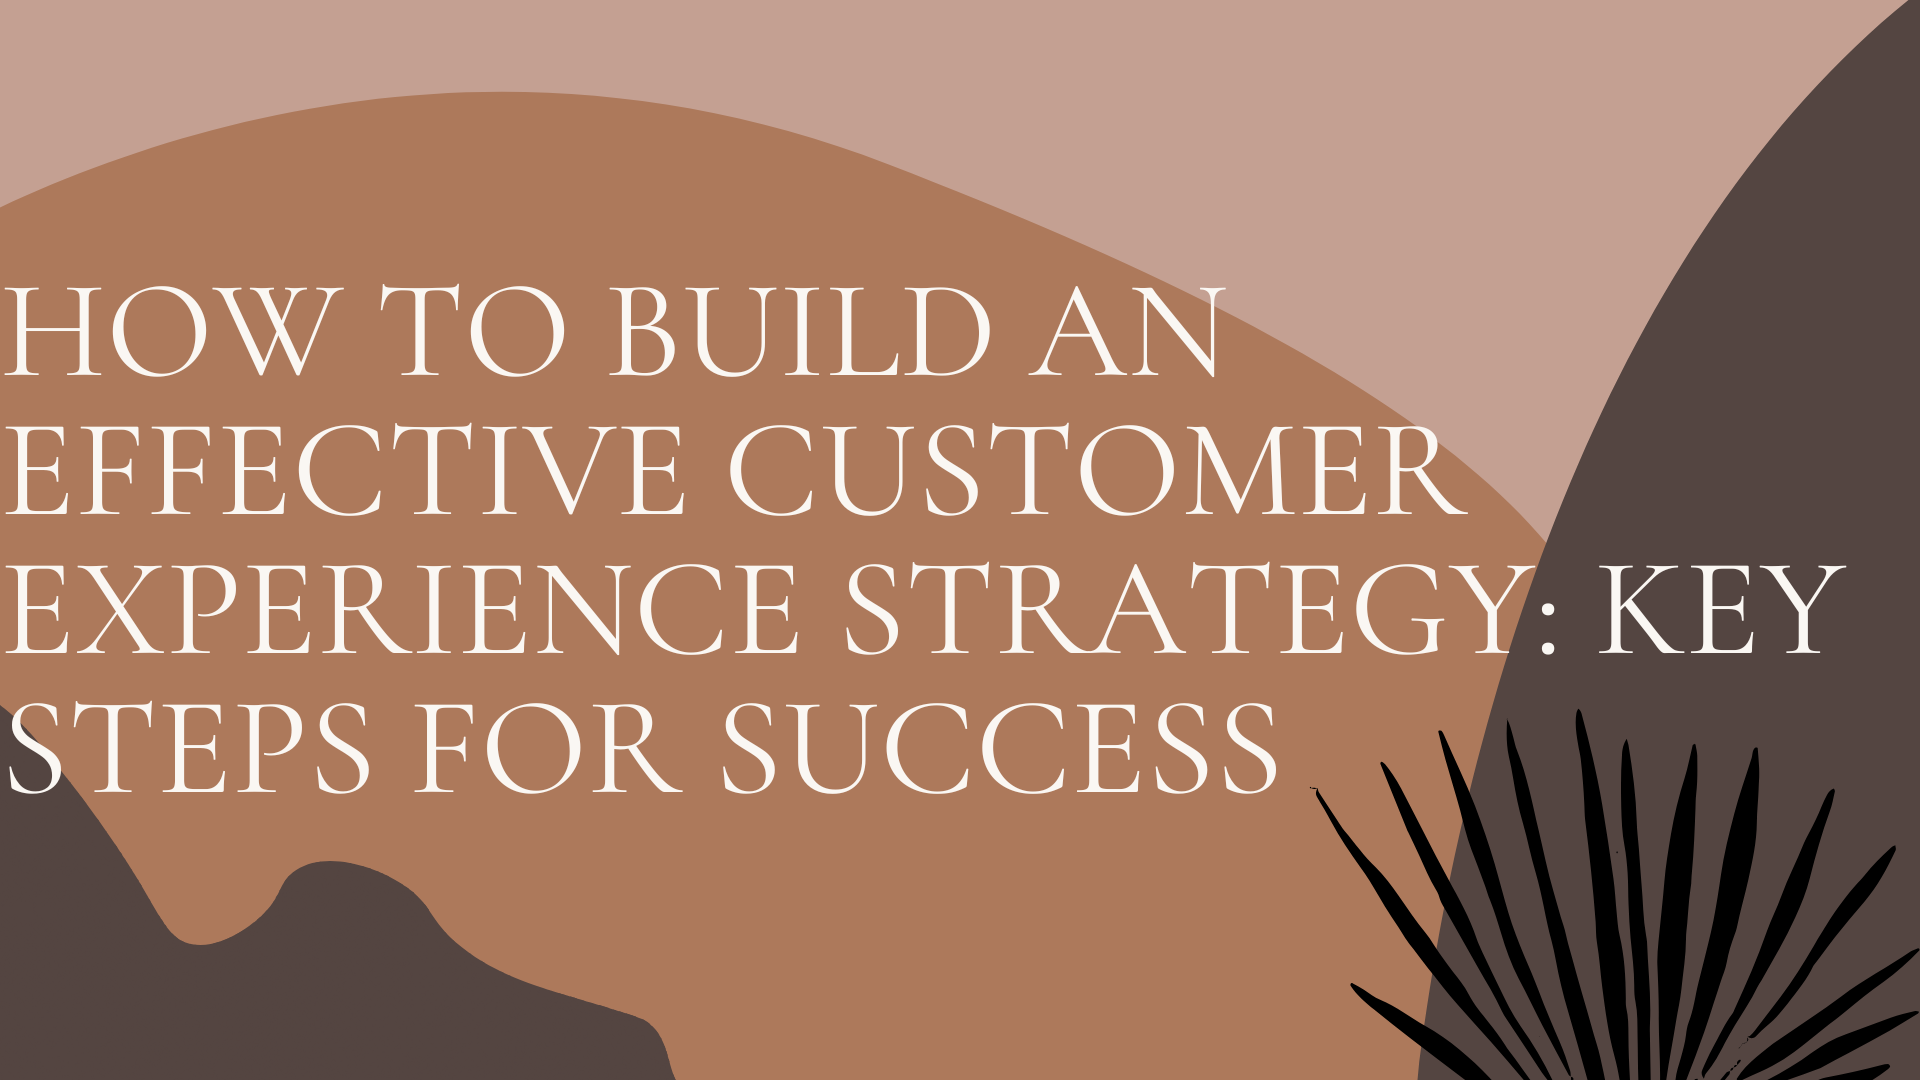 How-to-Build-an-Effective-Customer-Experience-Strategy-Key-Steps-for-Success